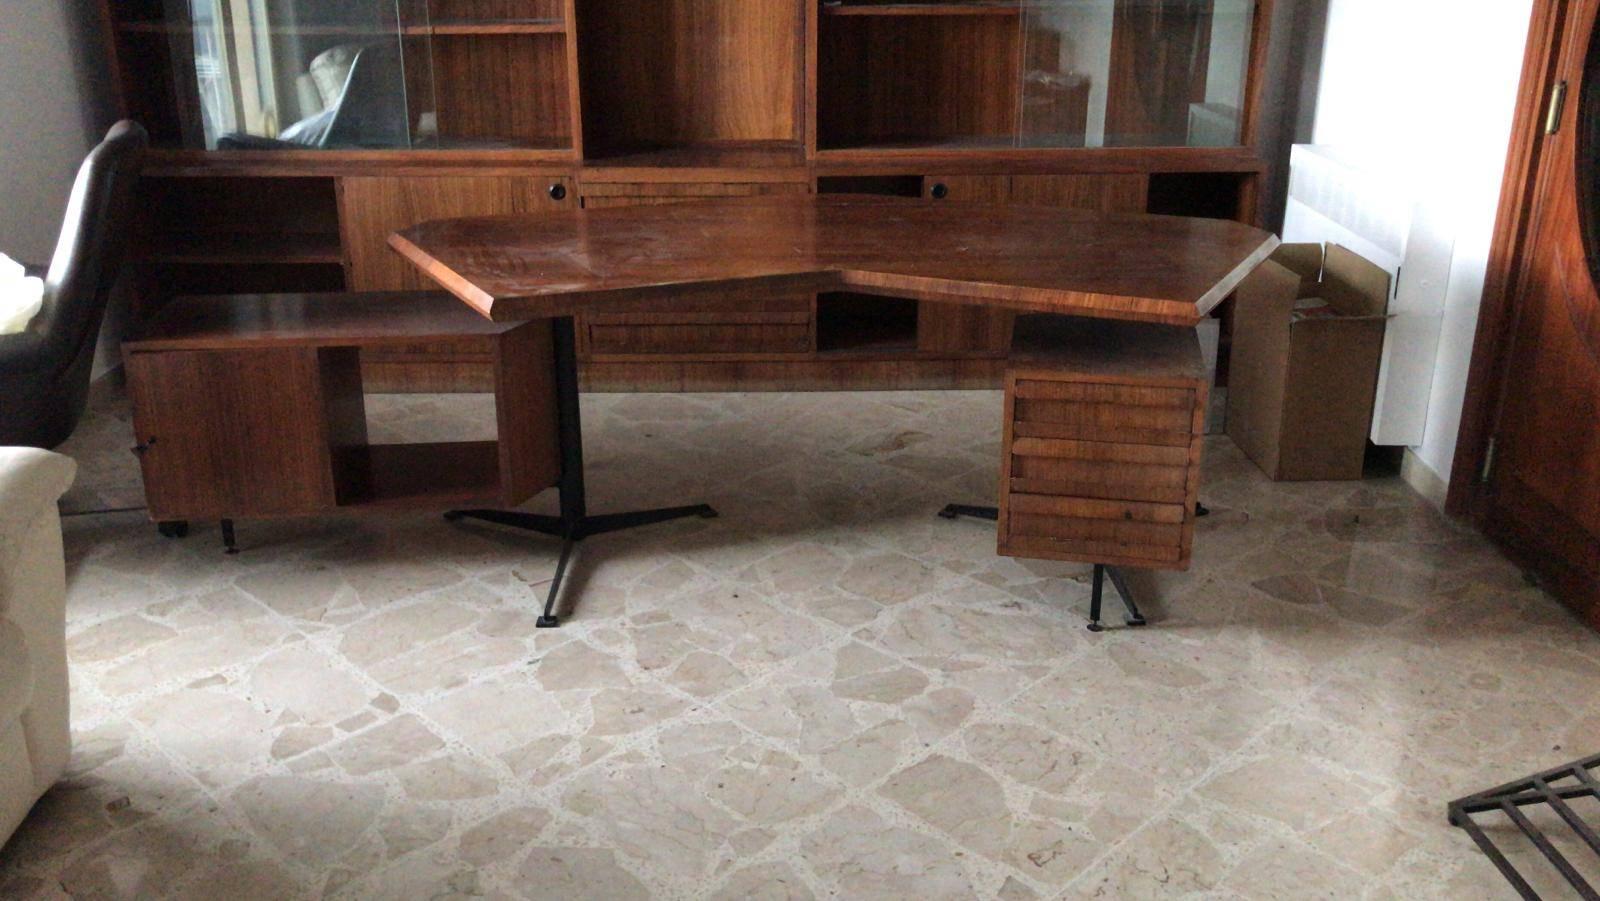 Desk T-96 'Boomerang', in rosewood and metal, by Osvaldo Borsani for Tecno, Italy, 1956.

This Boomerang desk by Osvaldo Borsani is made of rosewood. The two rotating cabinets are held in place by the characteristic metal tripods. These supports